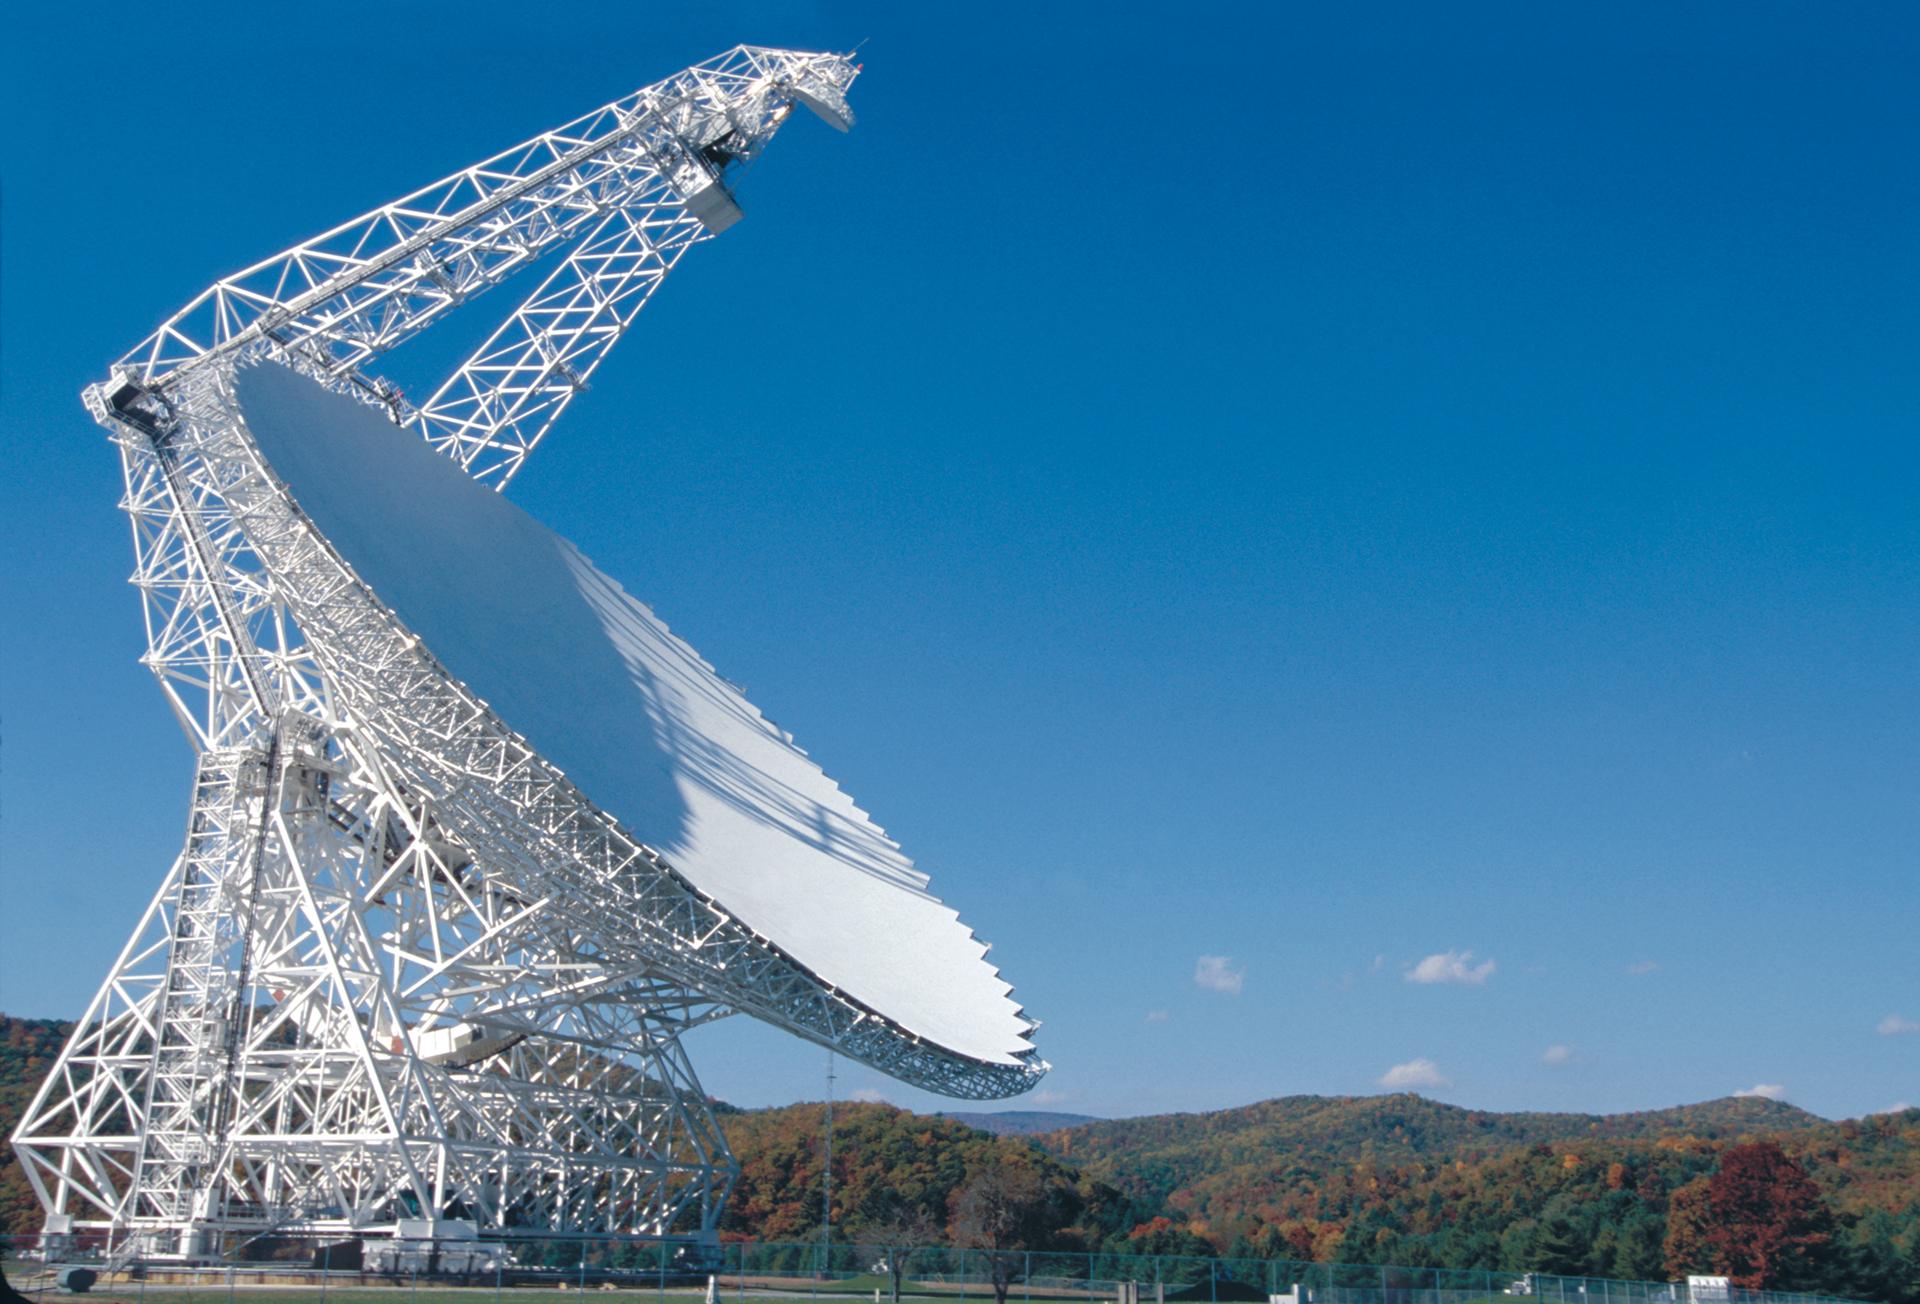 Image of the Green Bank Telescope in West Virginia. It's diameter is about 328 feet.